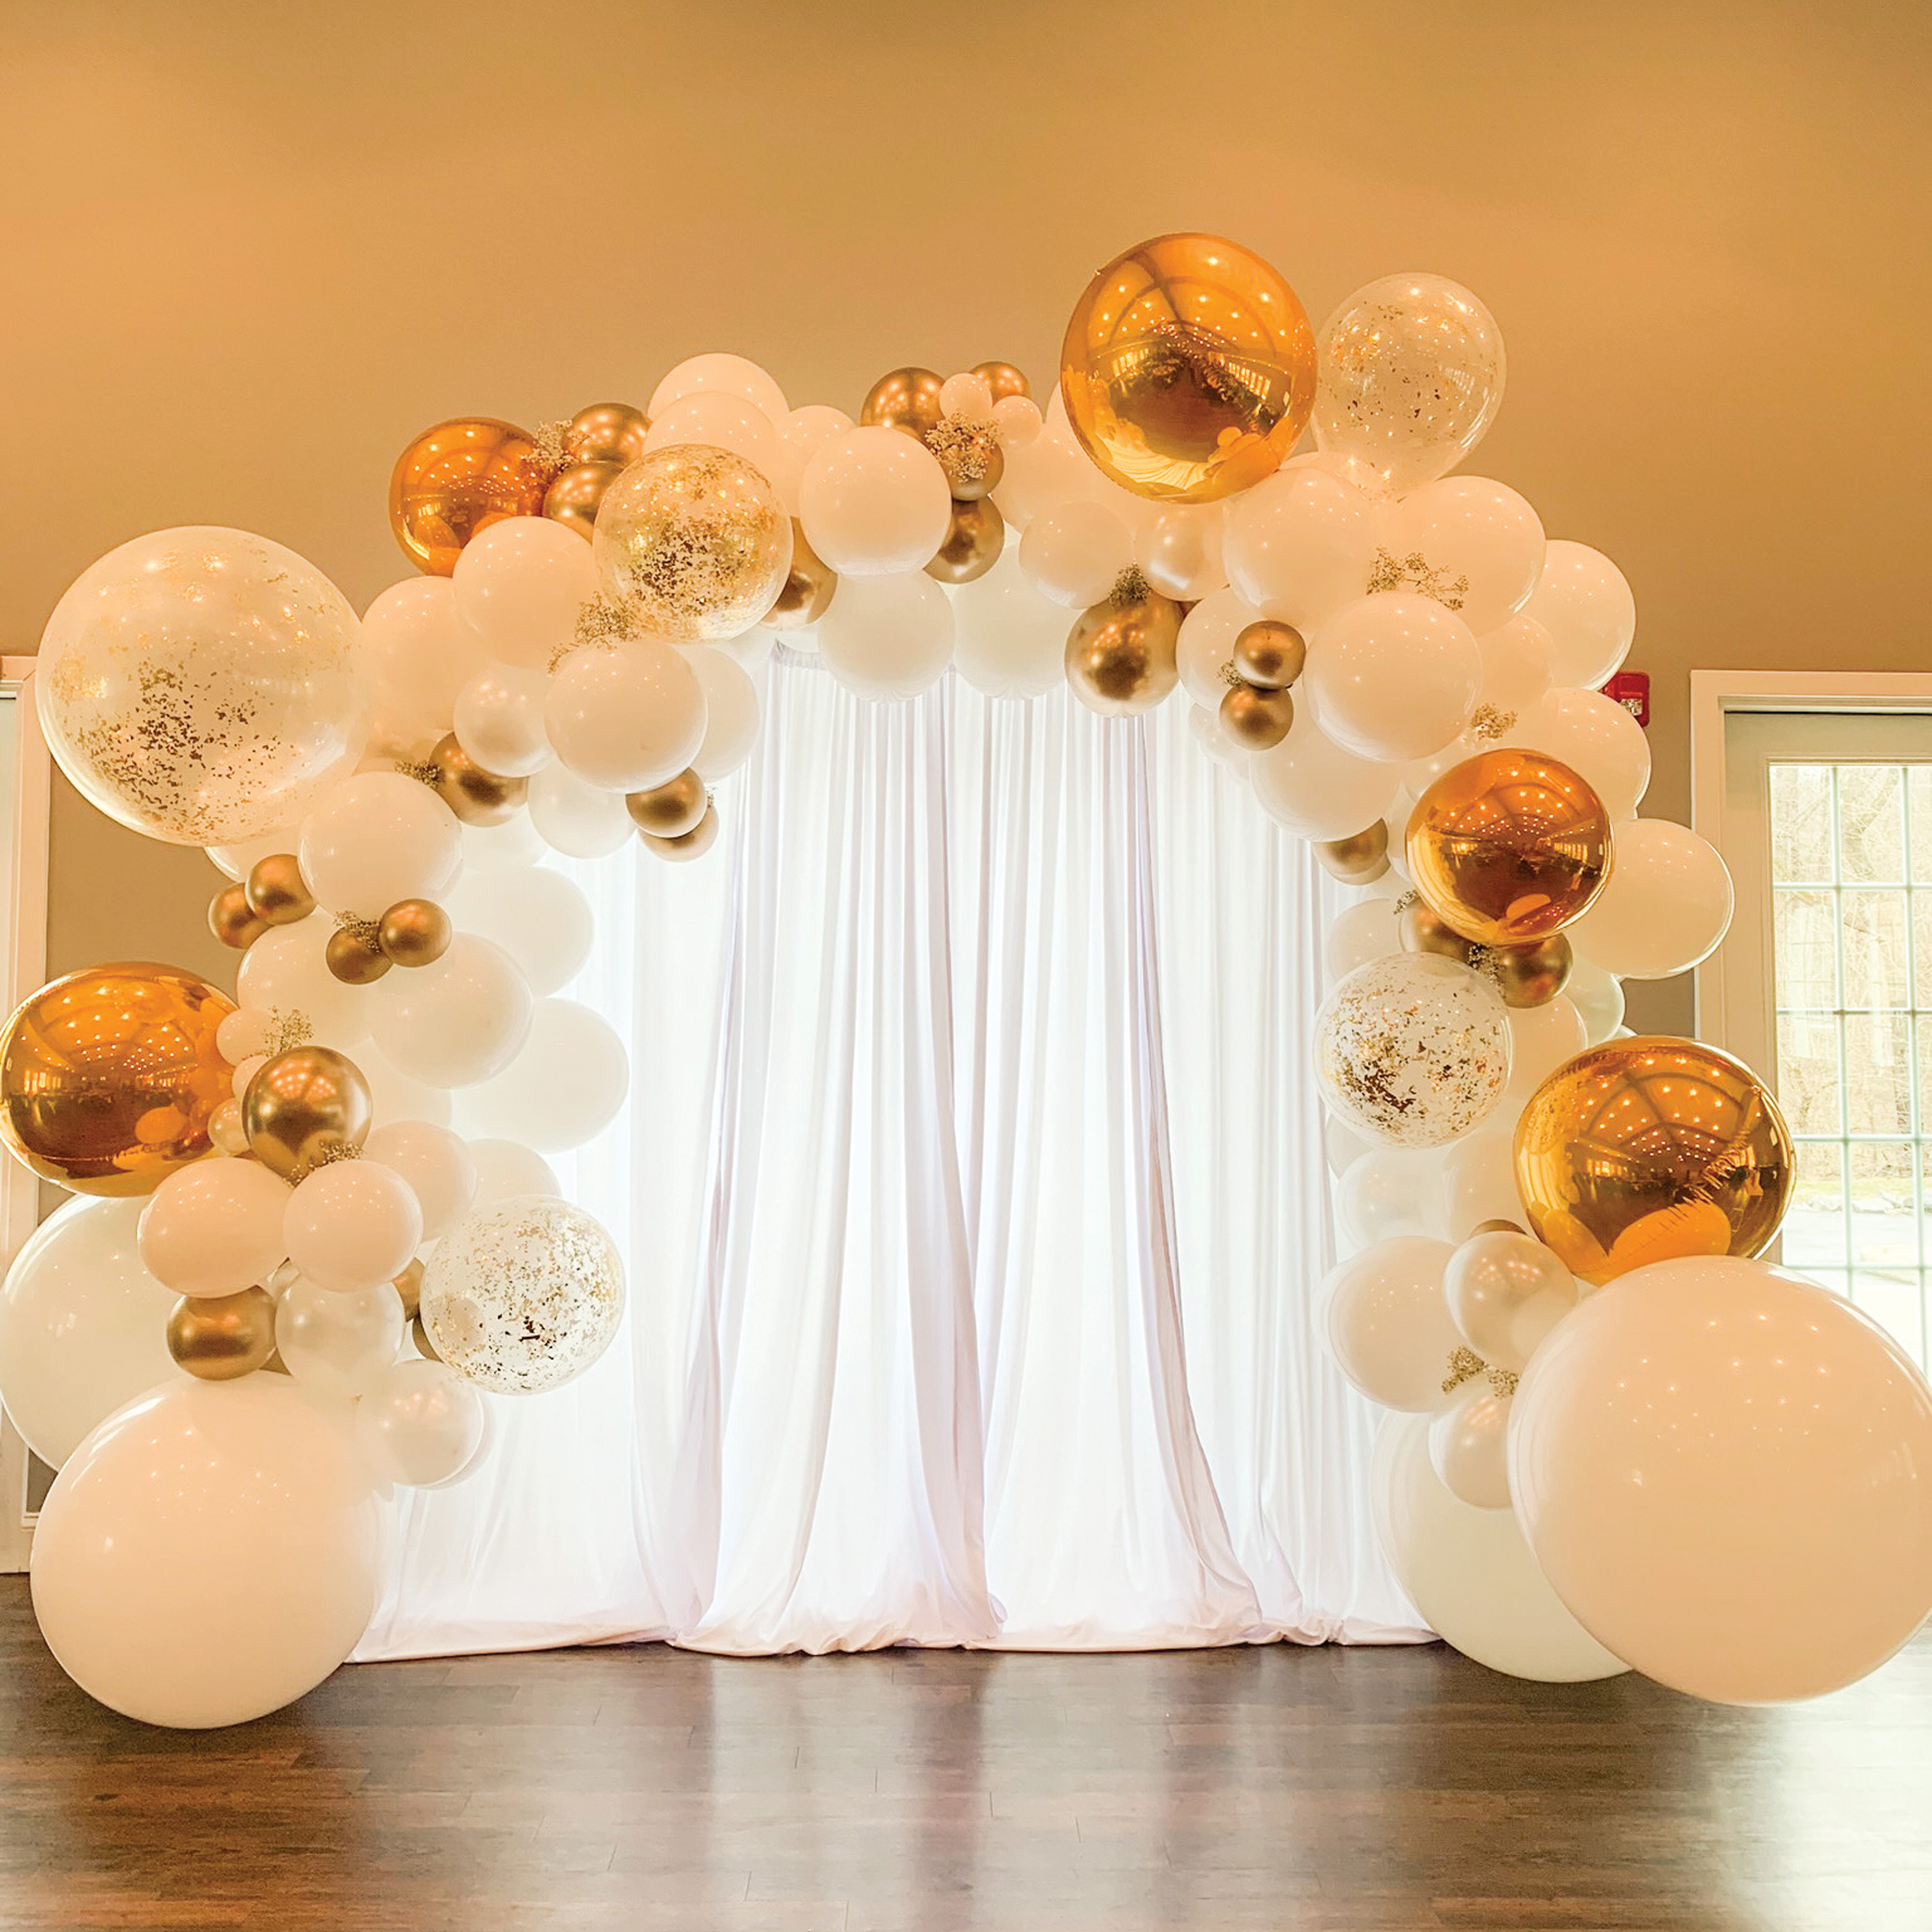 Organic Balloons are the New Trend in Event Décor